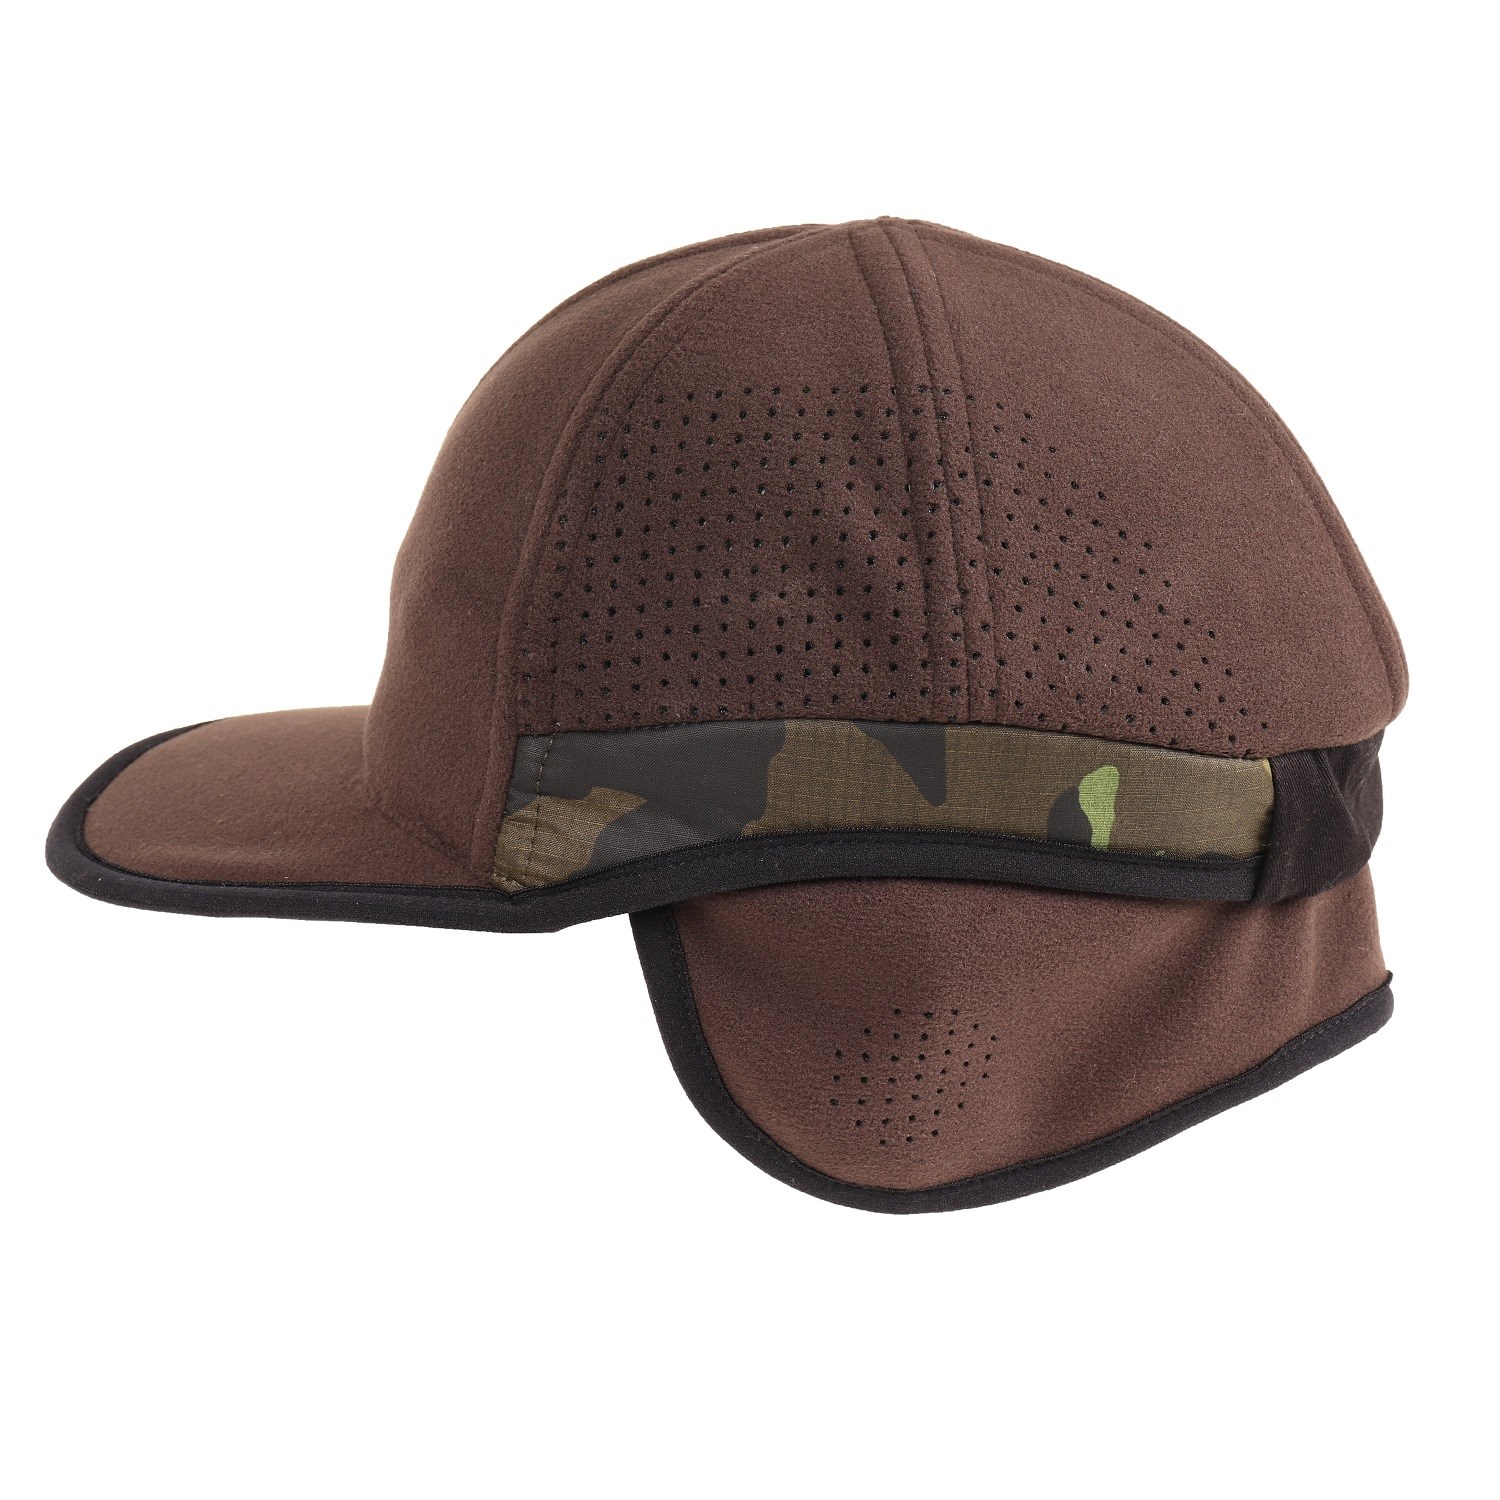 Cap WB with protection CAMO 95 FENIX Protector TW-143 L-11